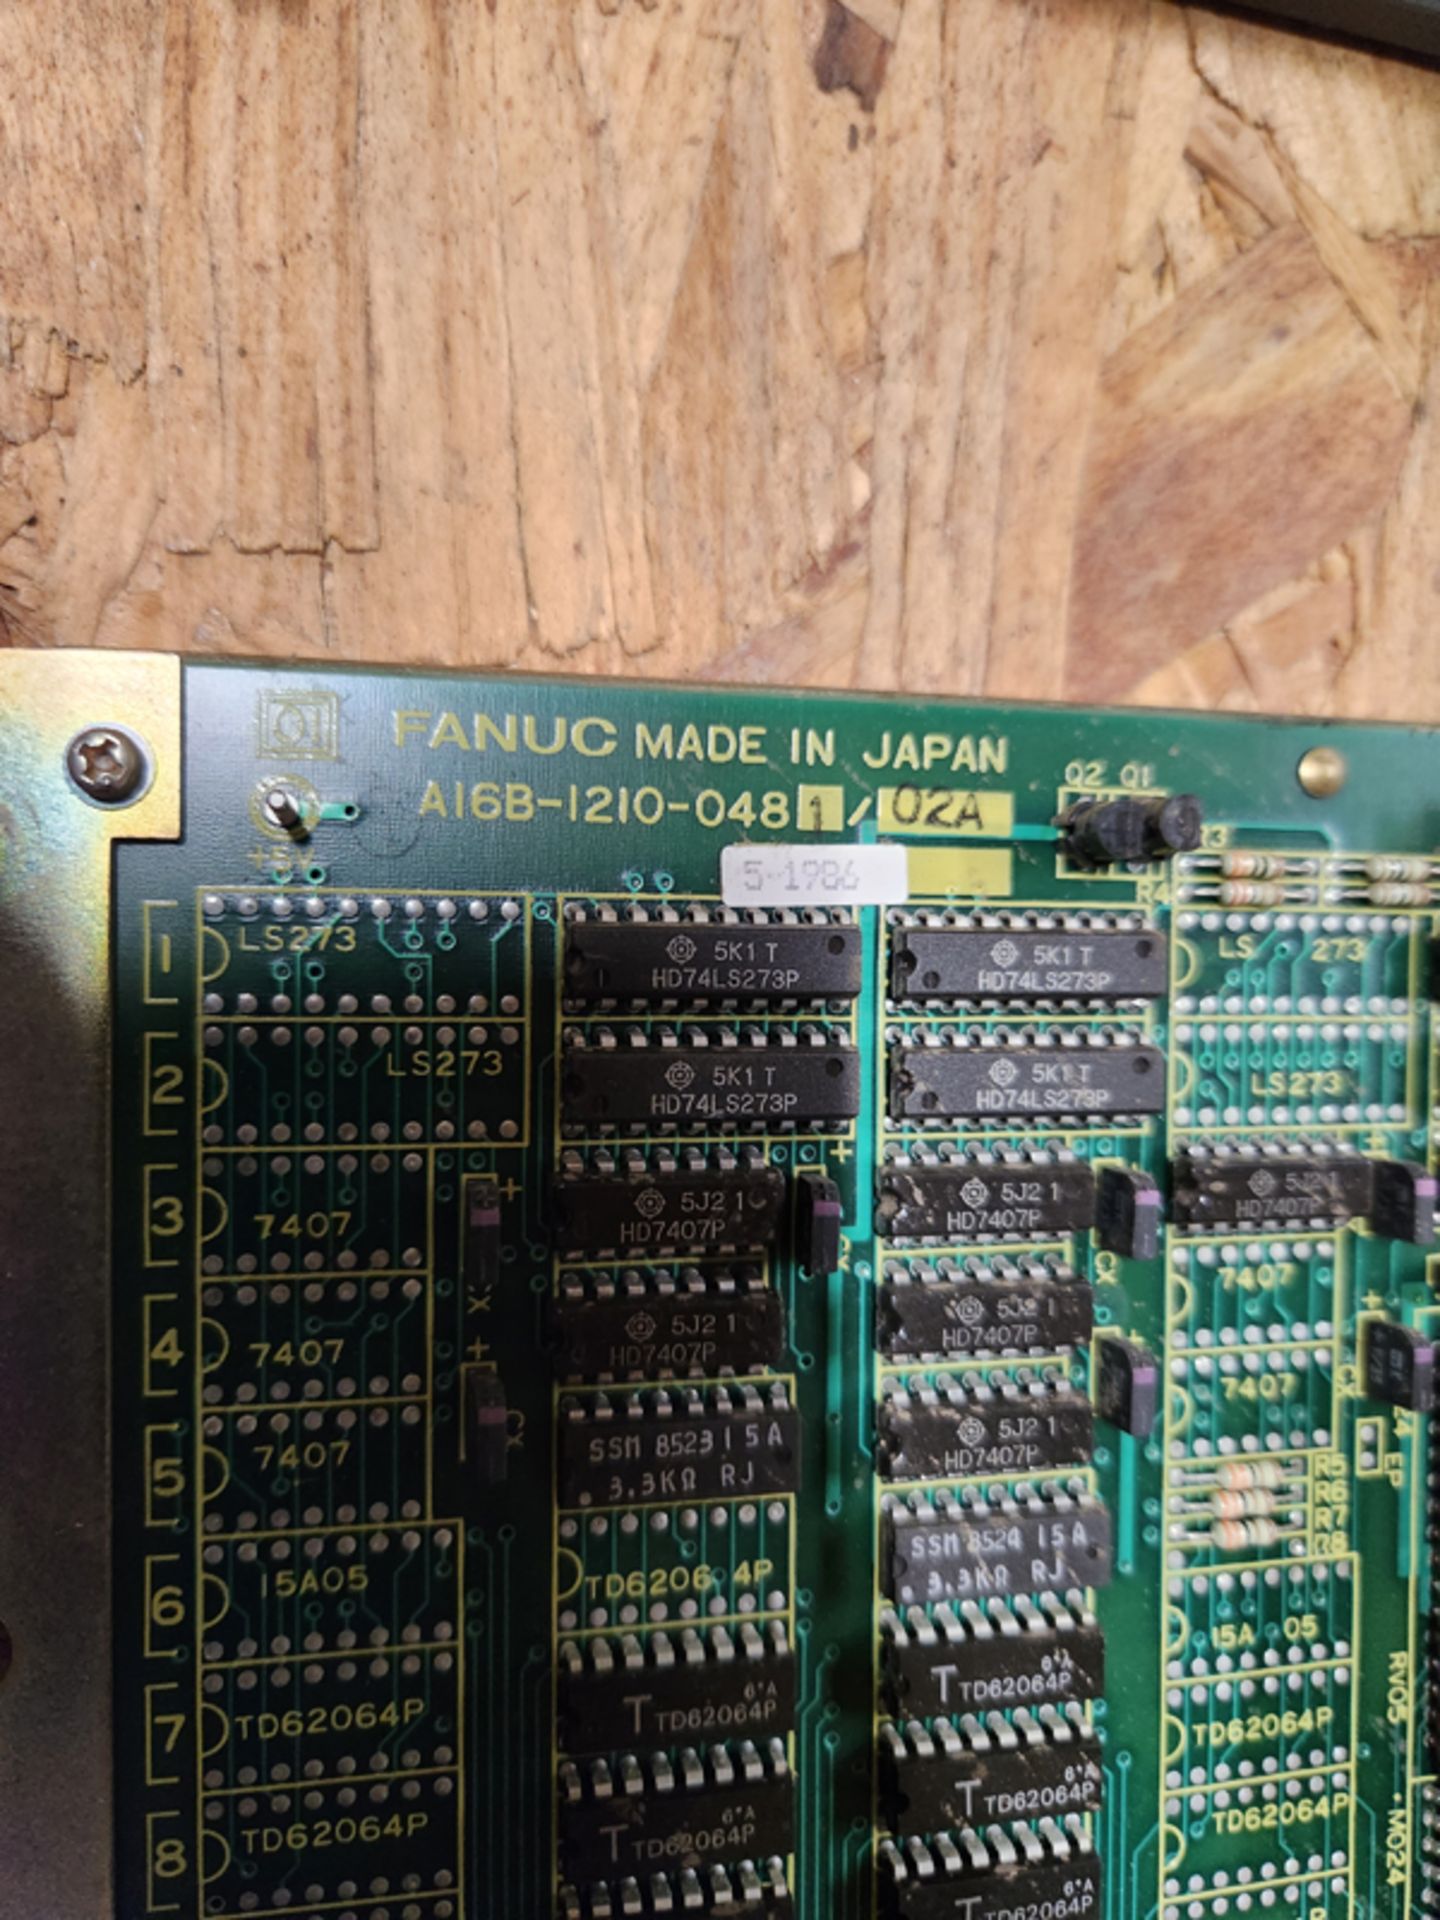 2 FANUC BOARDS A16B-1210-0481 AND A16B-2202-0730 - Image 2 of 3